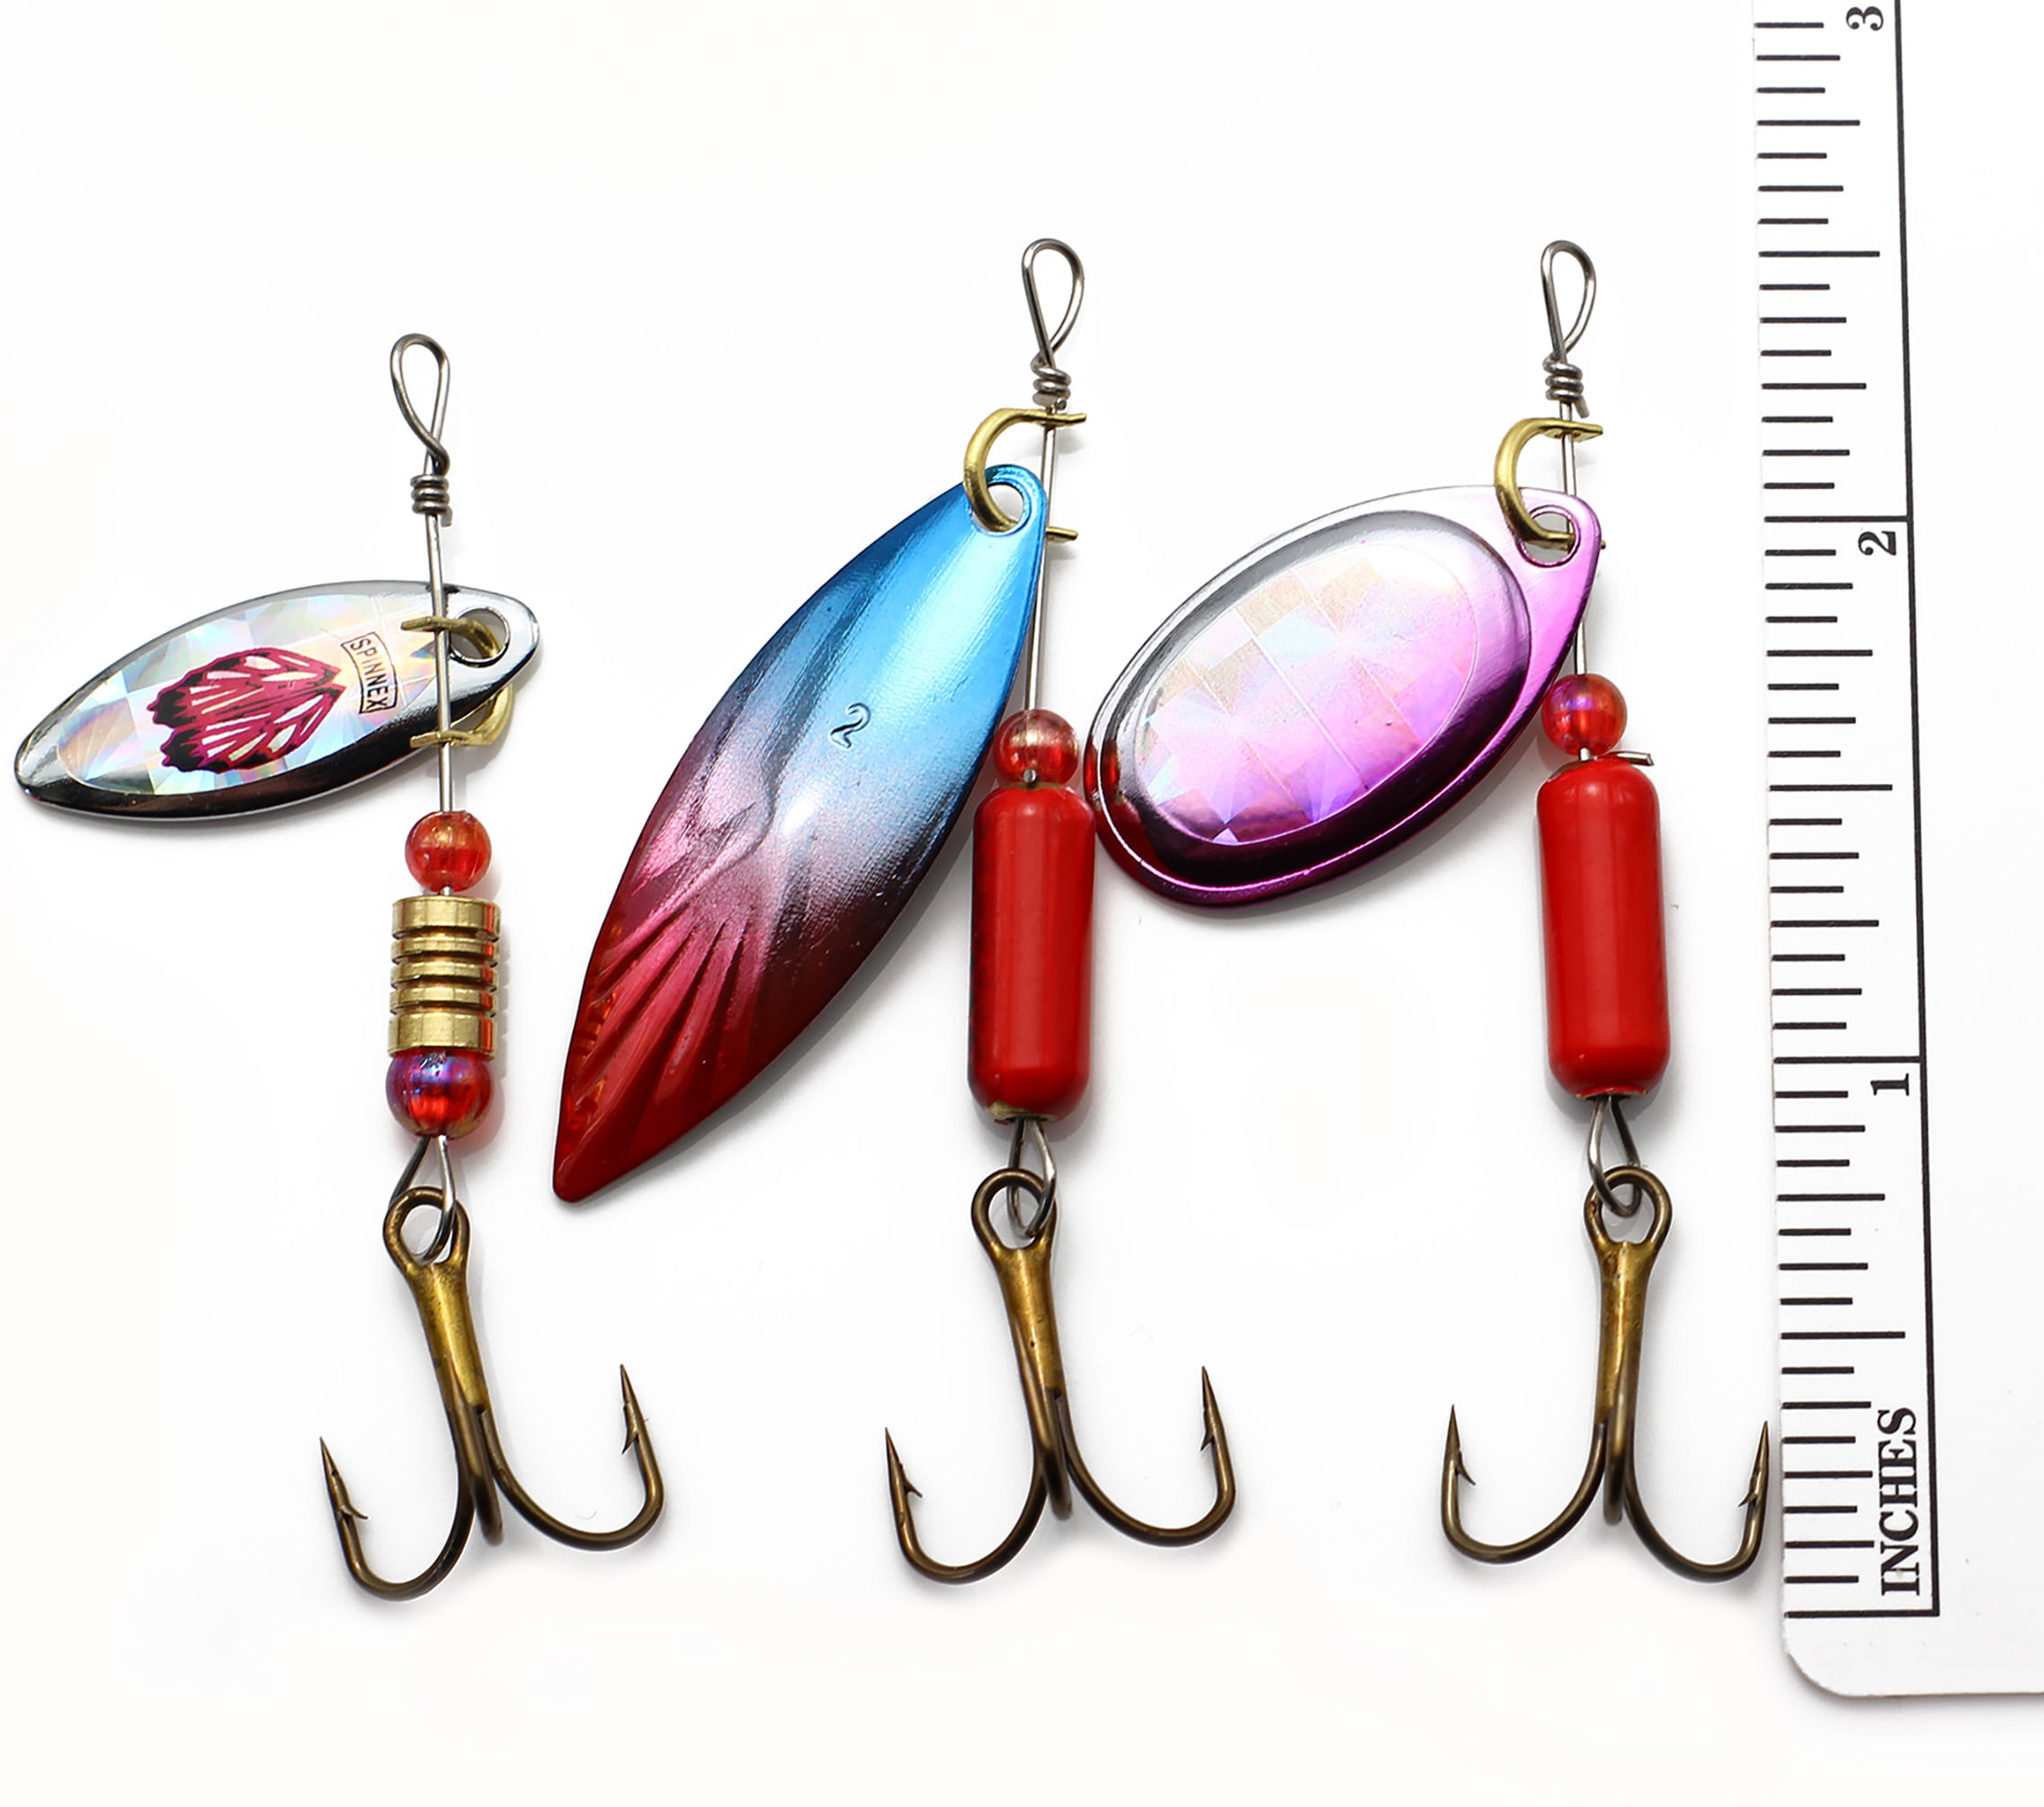 LotFancy Hard Metal Fishing Lures, 30 Spinner Baits with Tackle Box